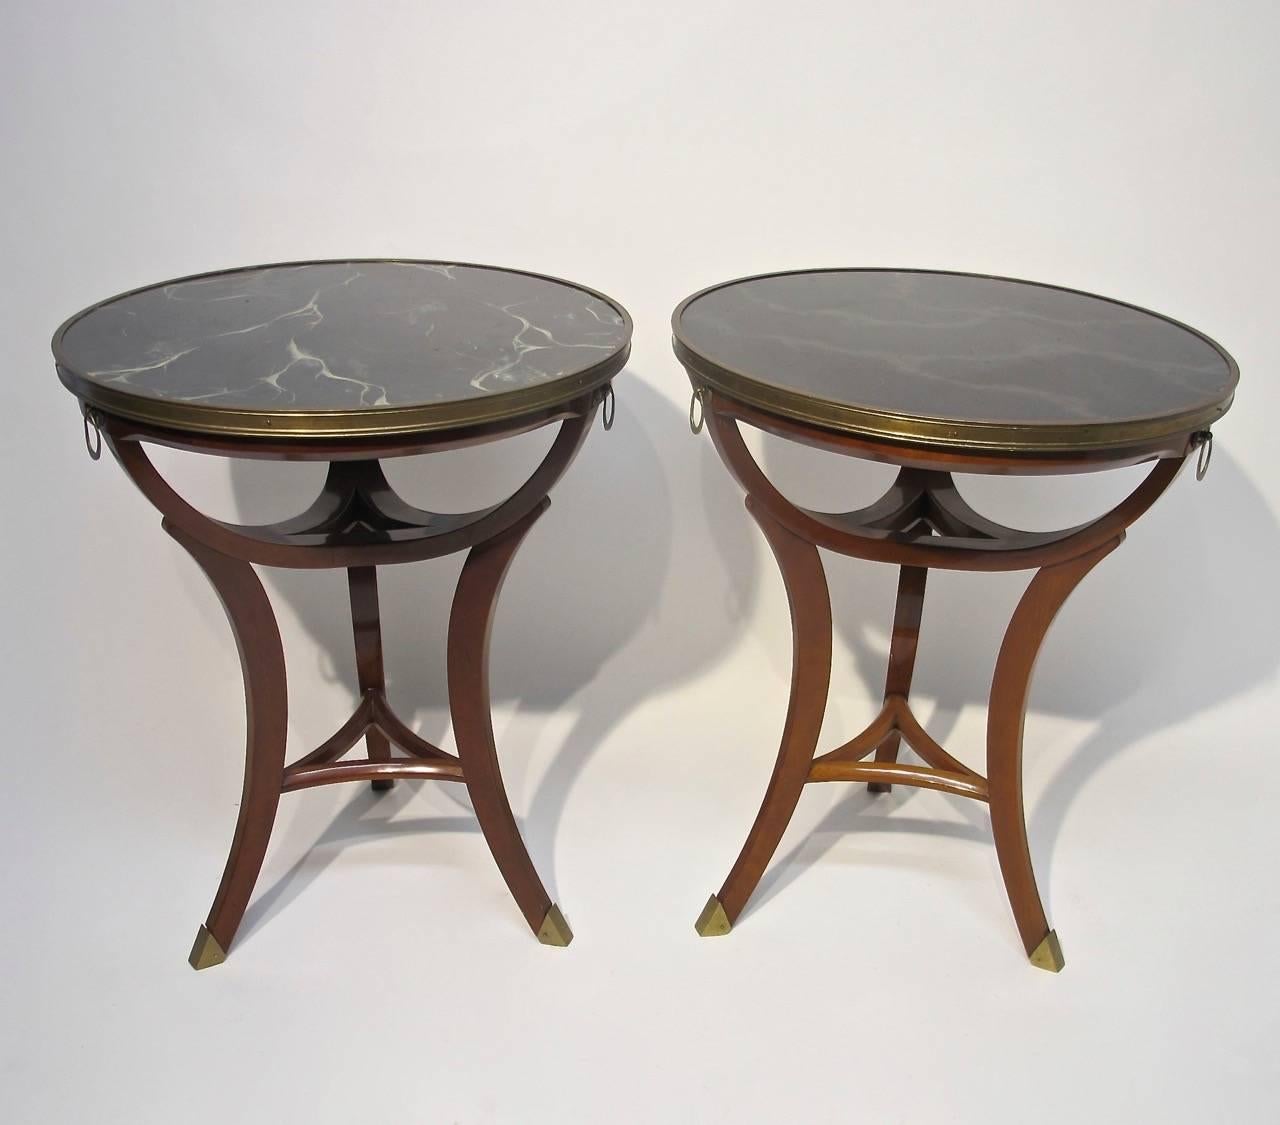 A pair of mid-20th century Widdicomb mahogany end or side tables with solid brass mounts and hardware, and with original inset faux marble formica tops. Tables retain their original Widdicomb labels underneath.